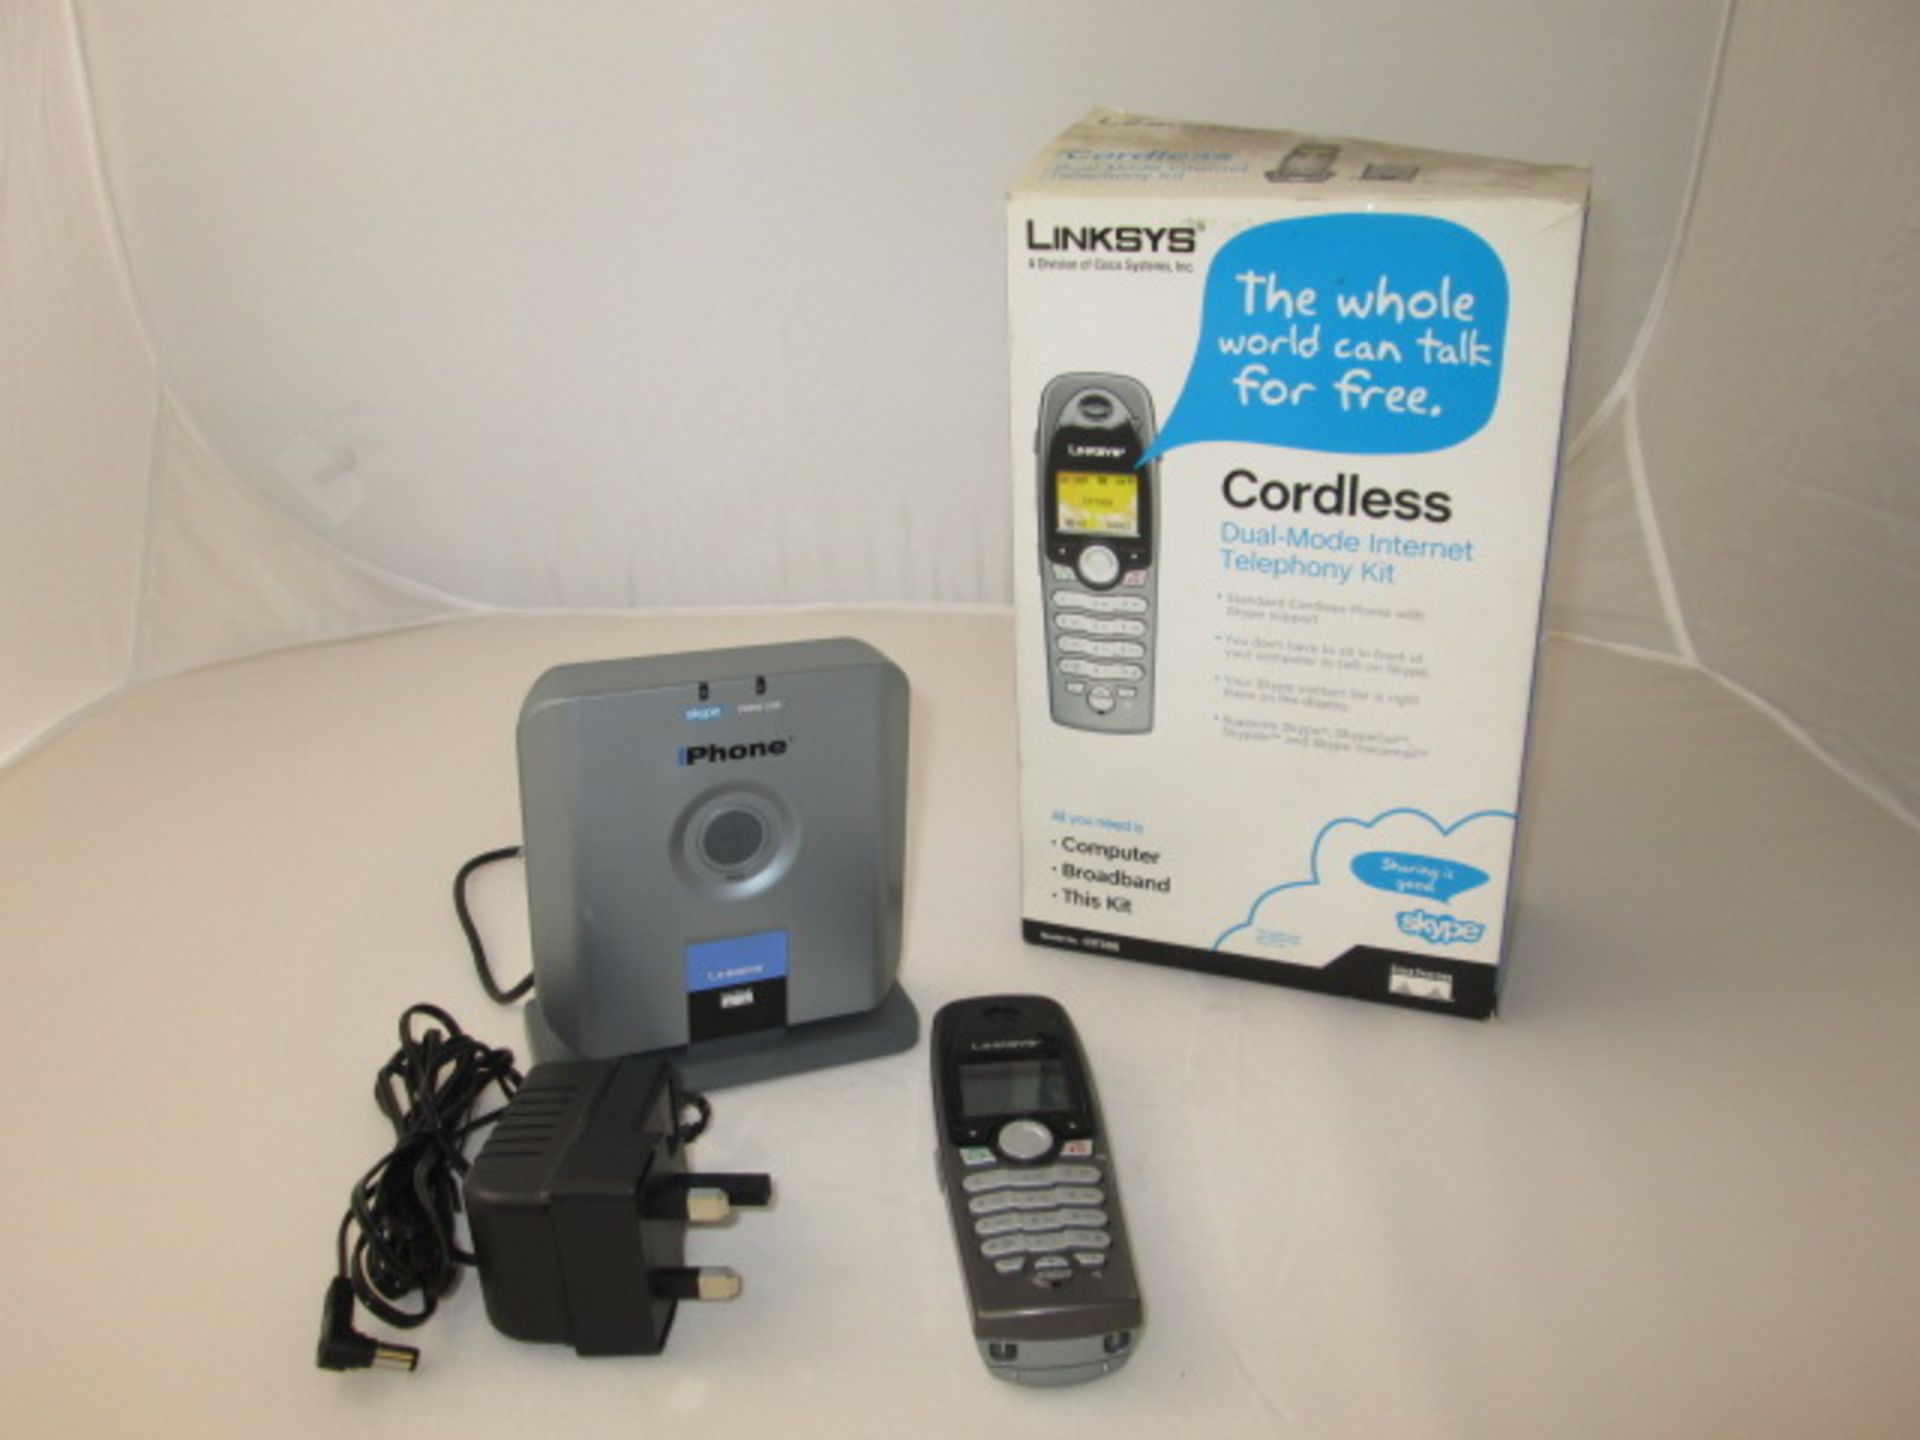 Linksys Cordless Dual Mode Internet Telephony Kit, Model CIT300. Complete with Handset, Charger with